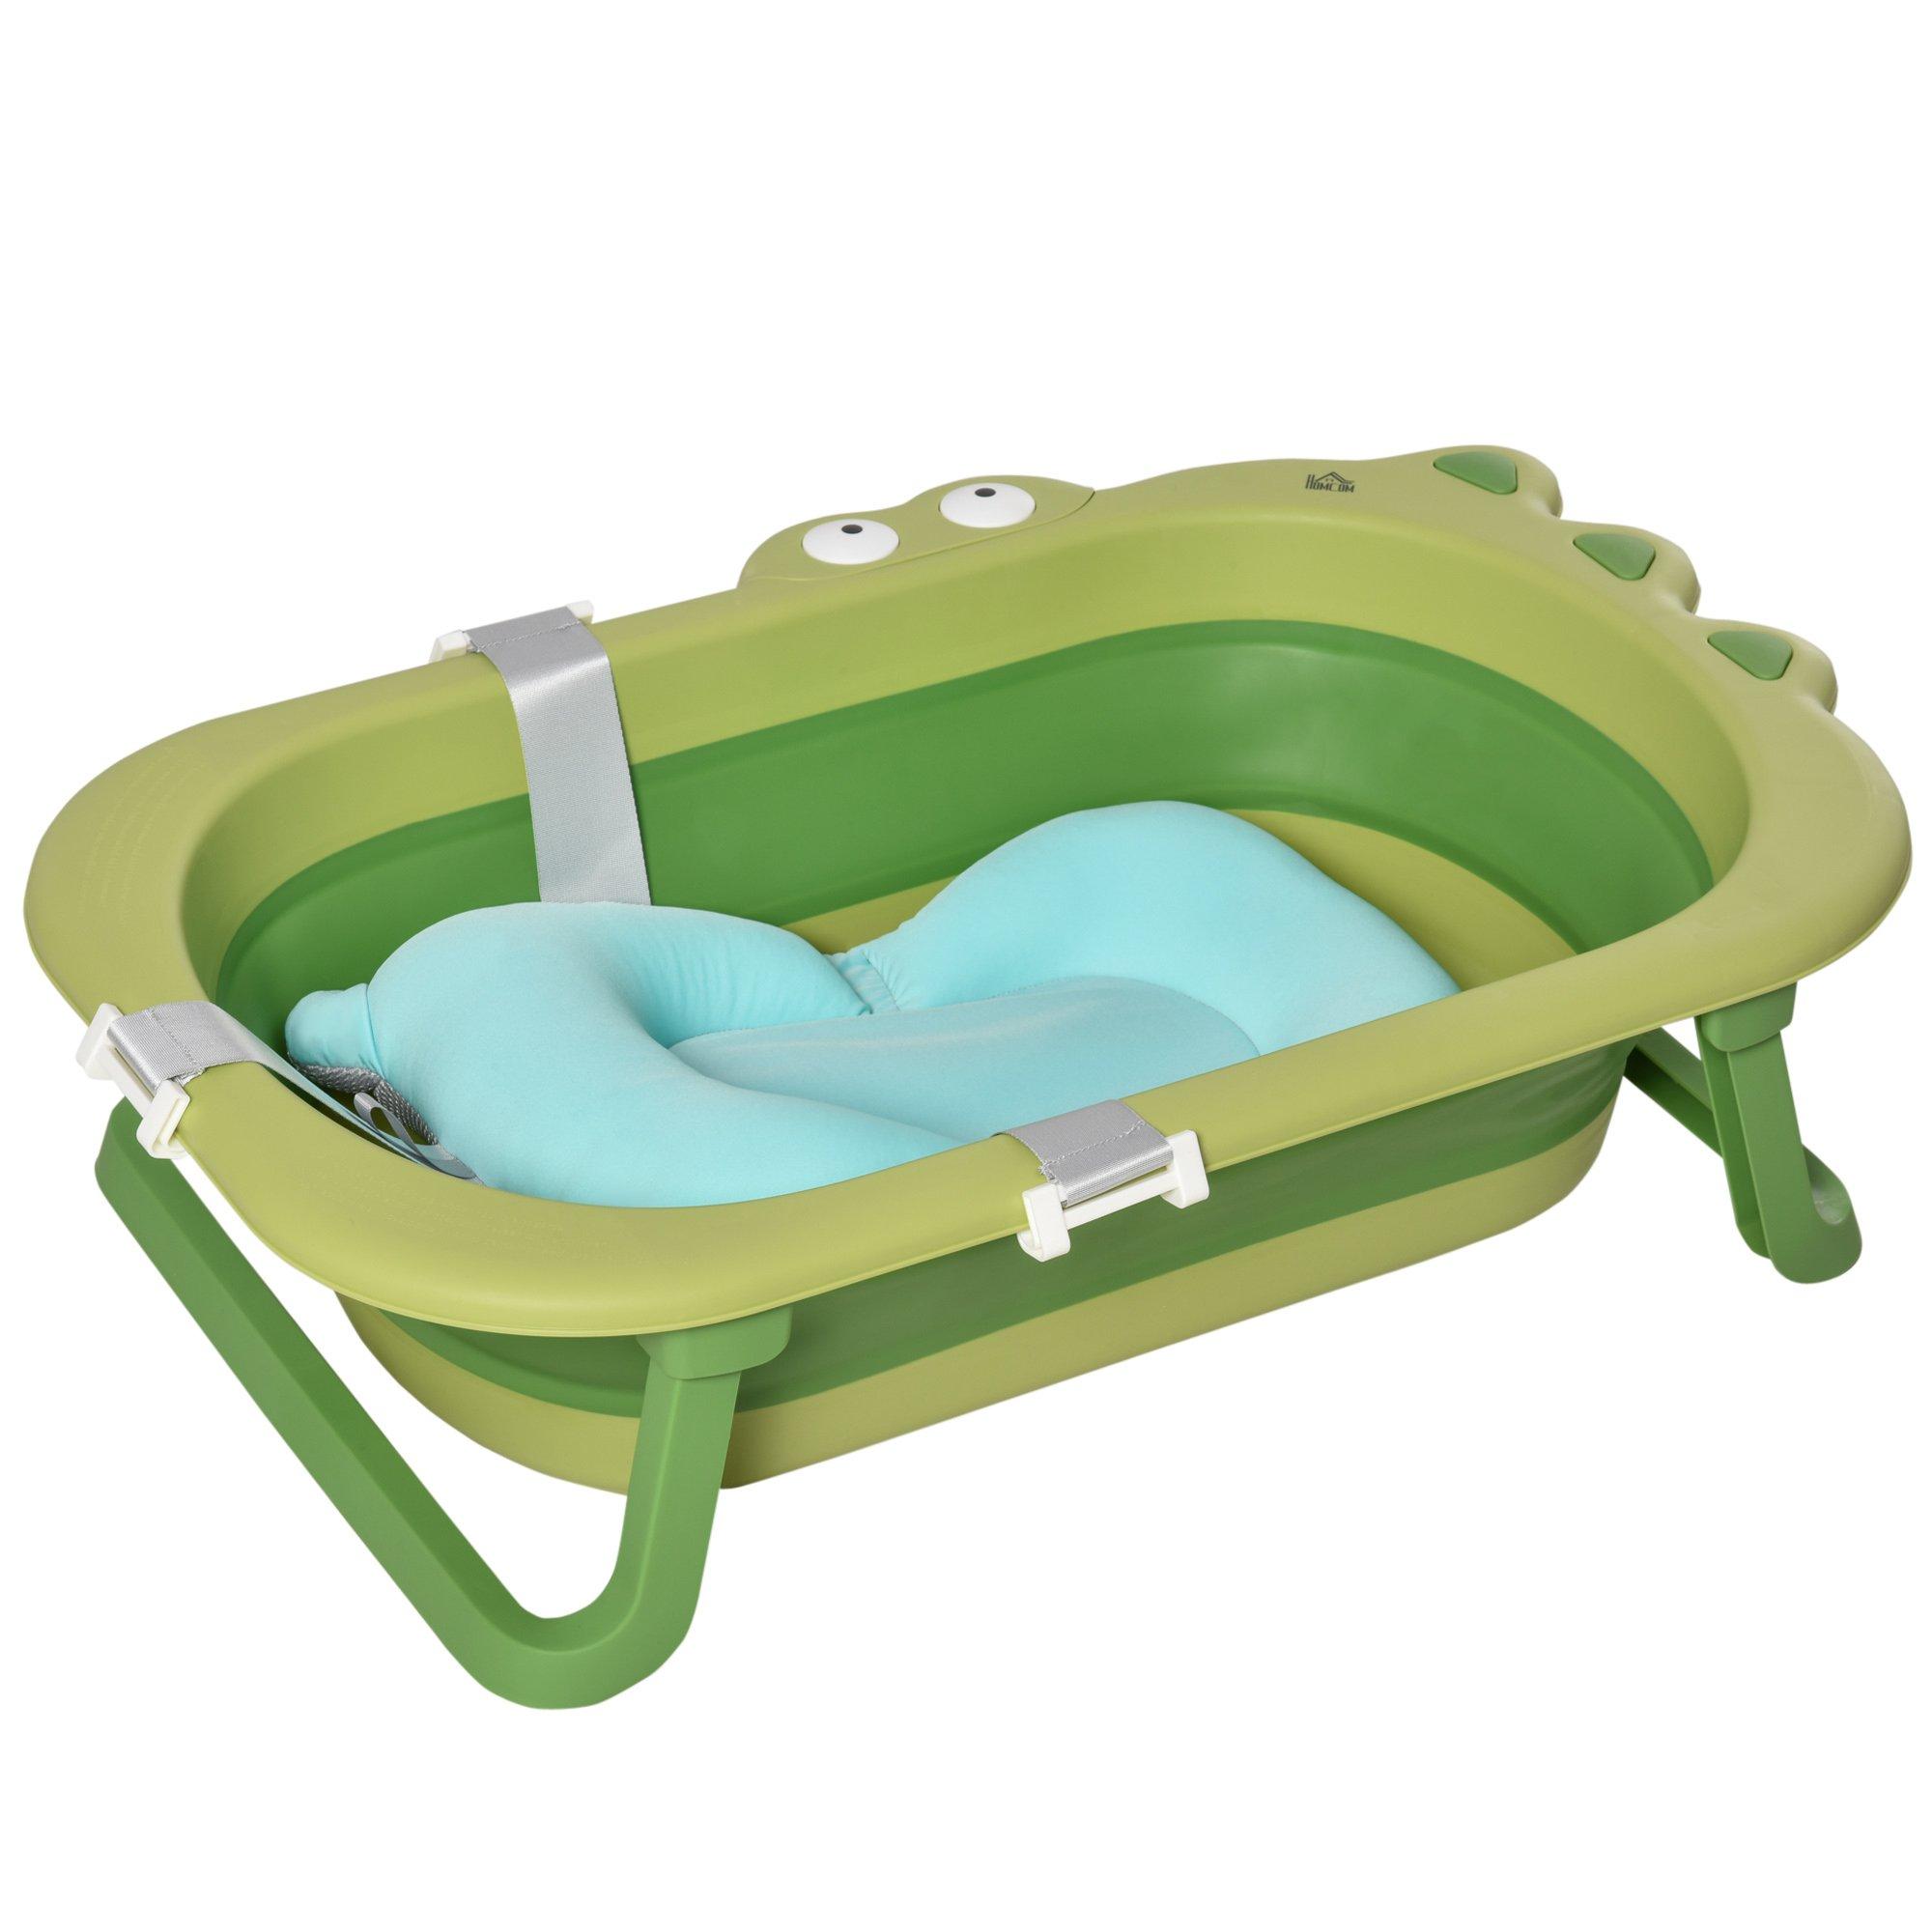 Ergonomic Baby Bath Tub for Toddler with Baby Cushion for 0-3 Years